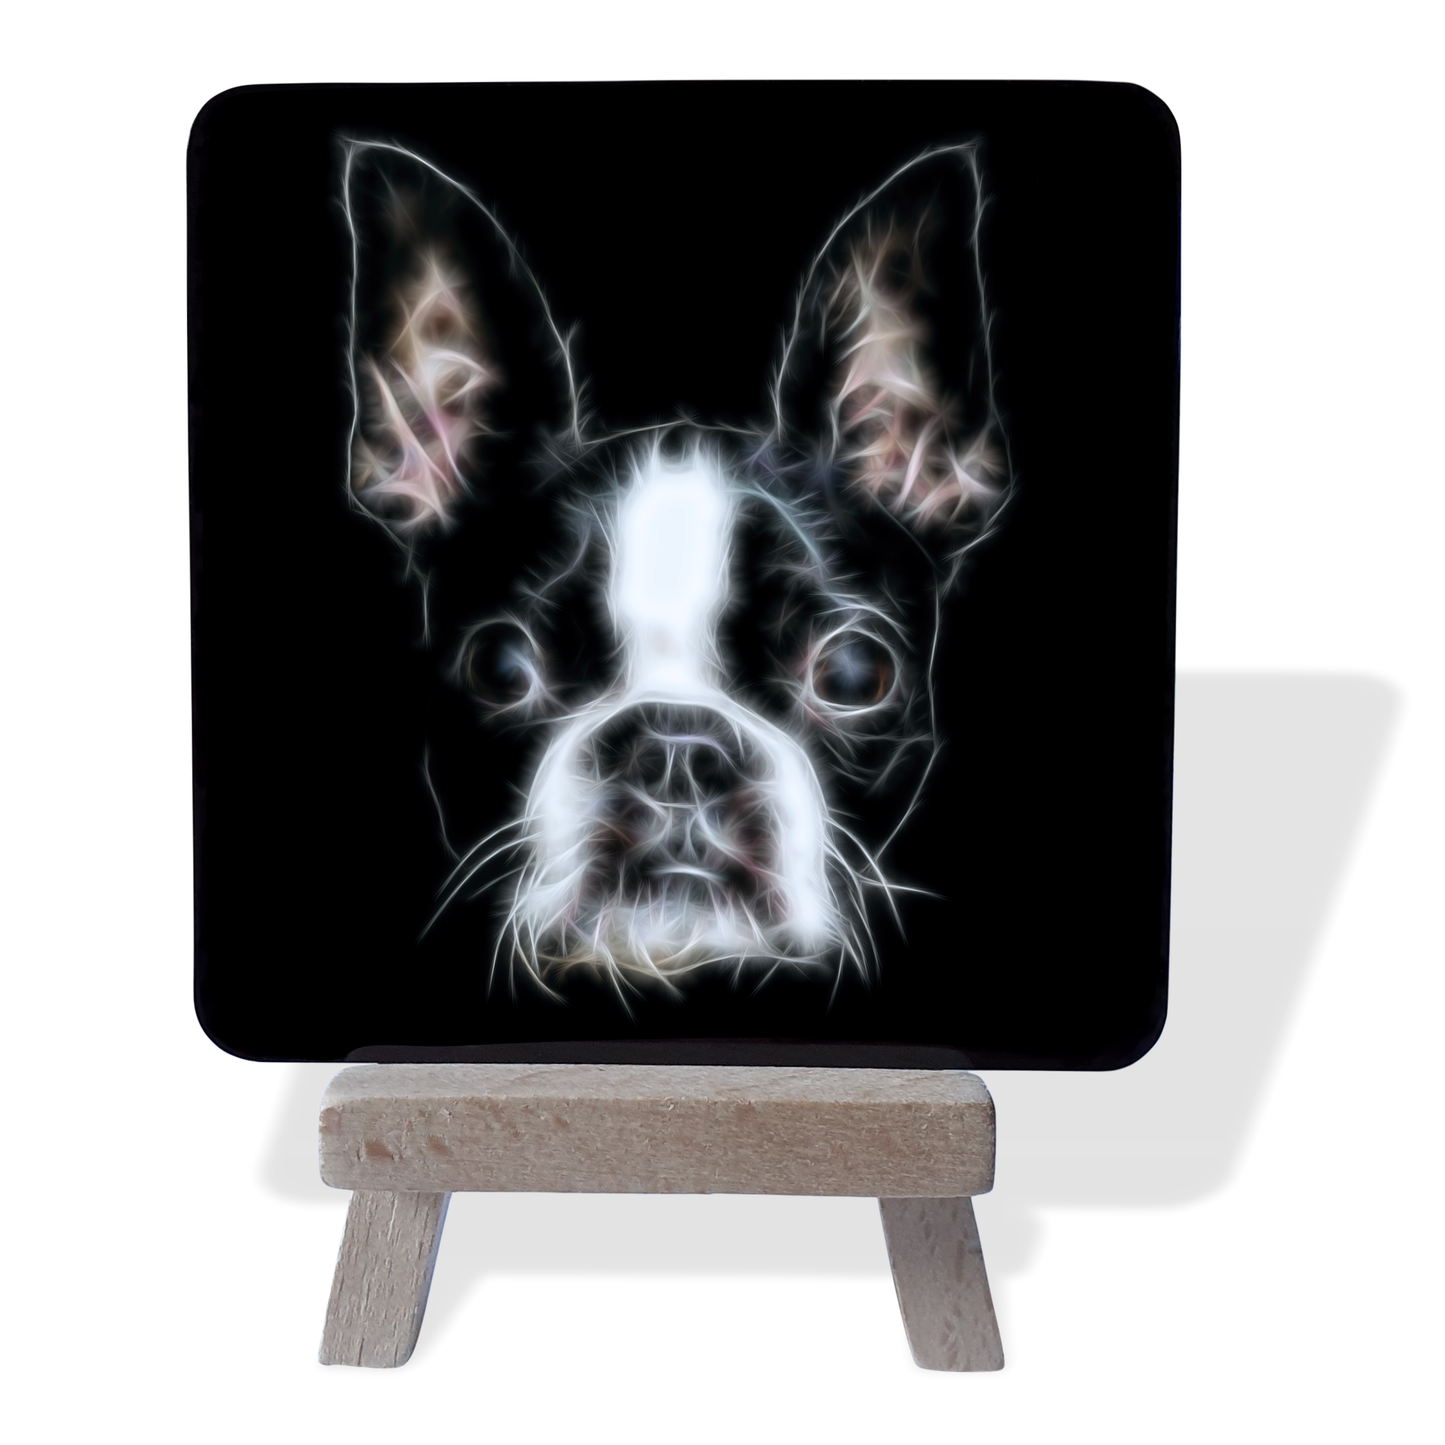 Boston Terrier #1 Metal Plaque and Mini Easel with Fractal Art Design